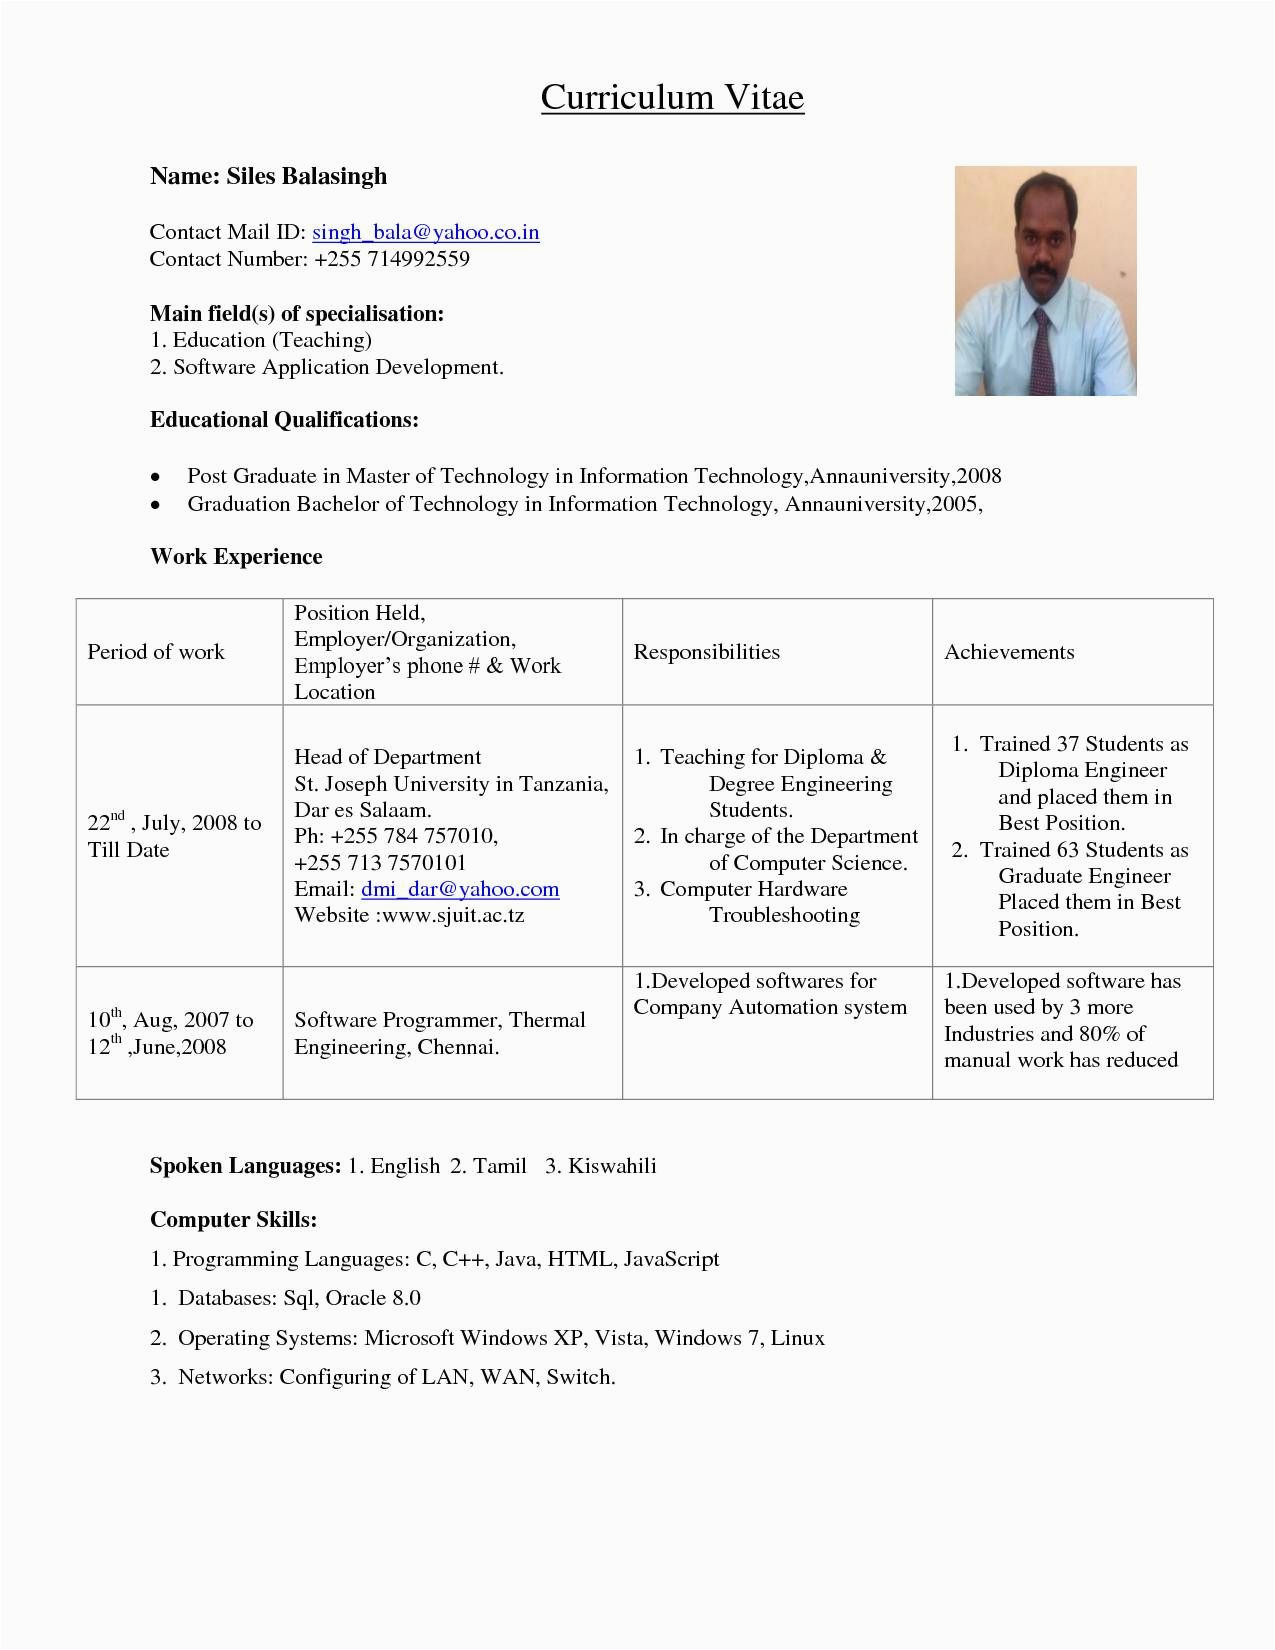 Sample Resume for assistant Professor In Engineering College Resume format for Lecturer Job In Engineering College